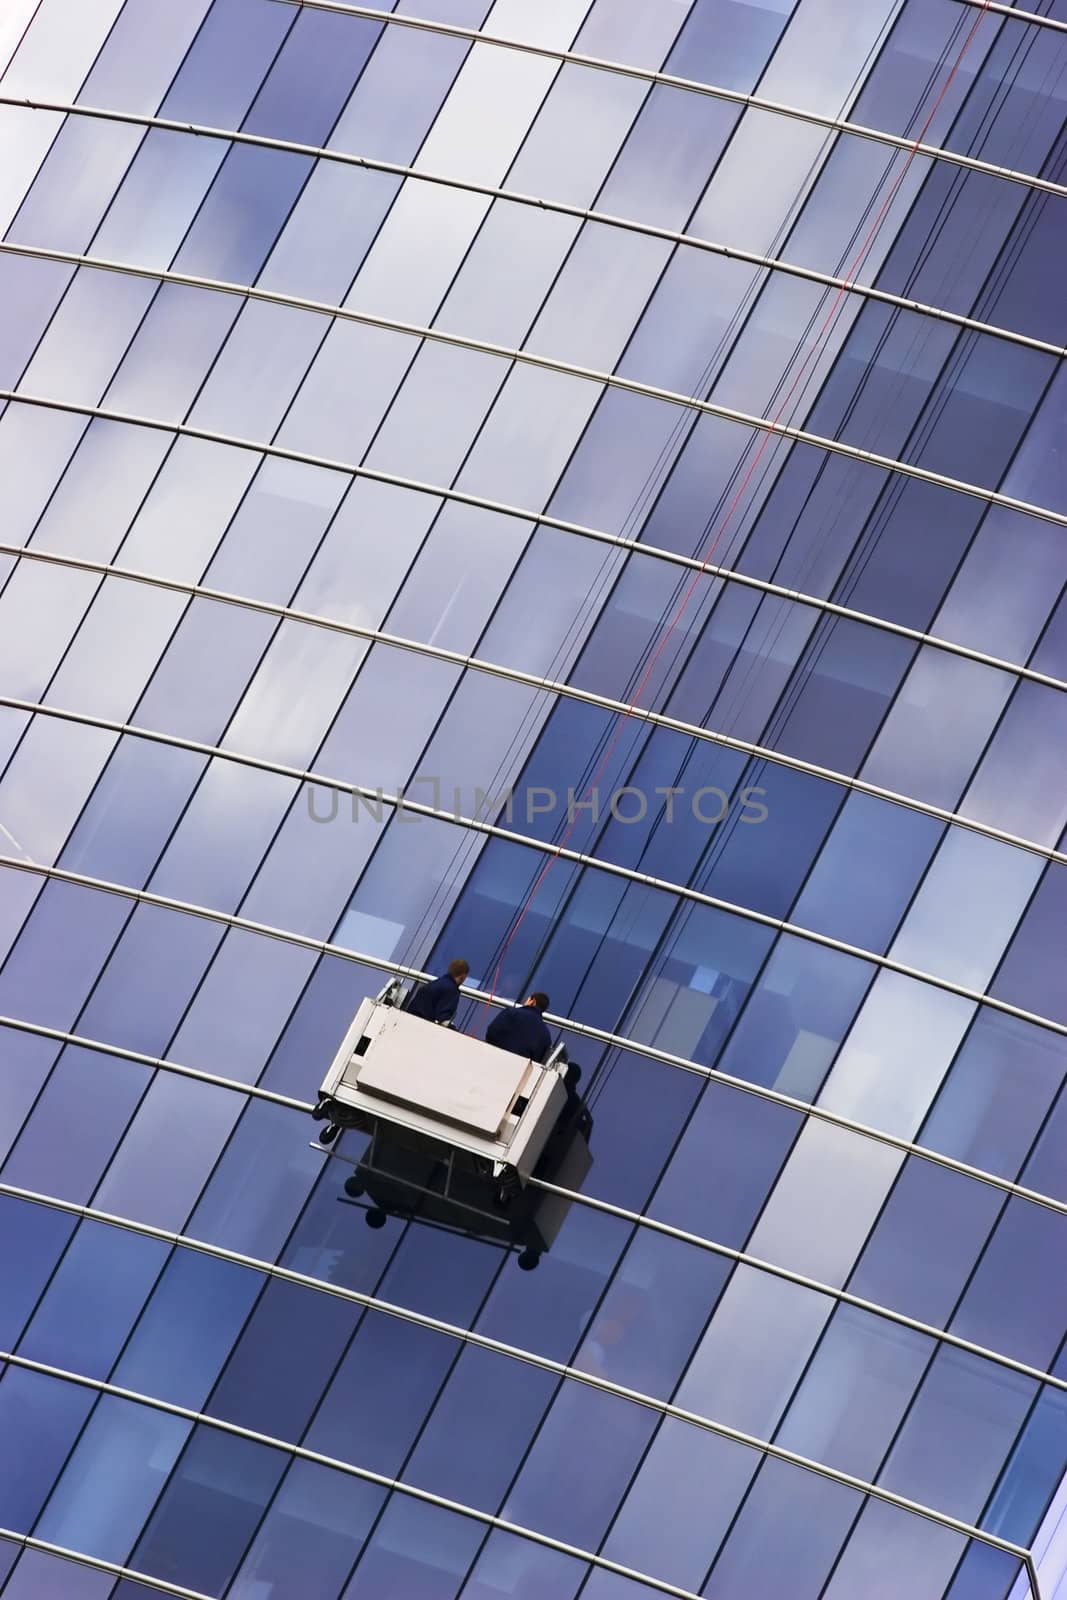 Window washer by ints